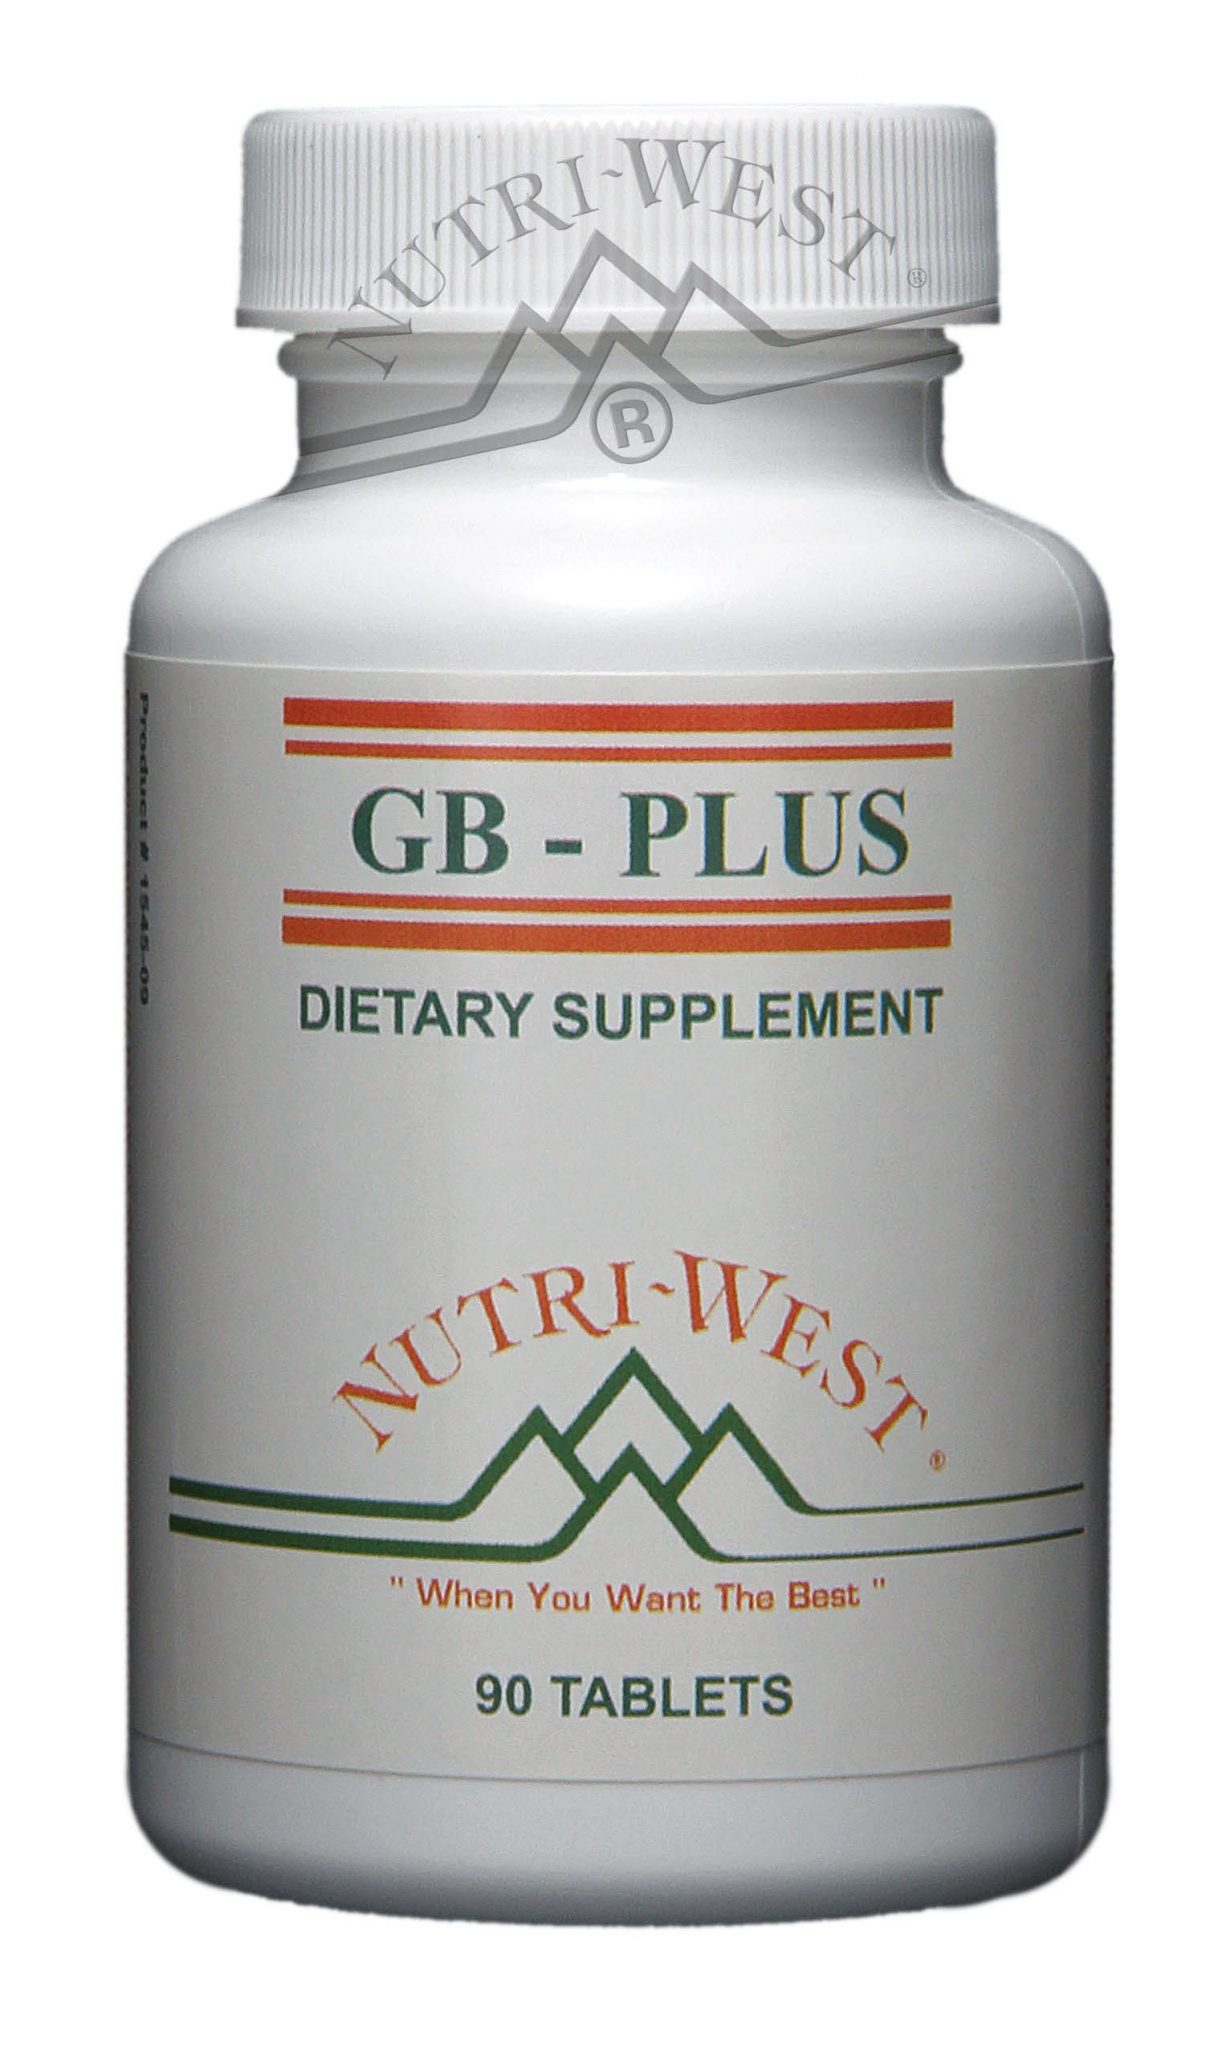 ERGY D / ERGY D Plus - Nutergia Laboratory - Dietary supplements